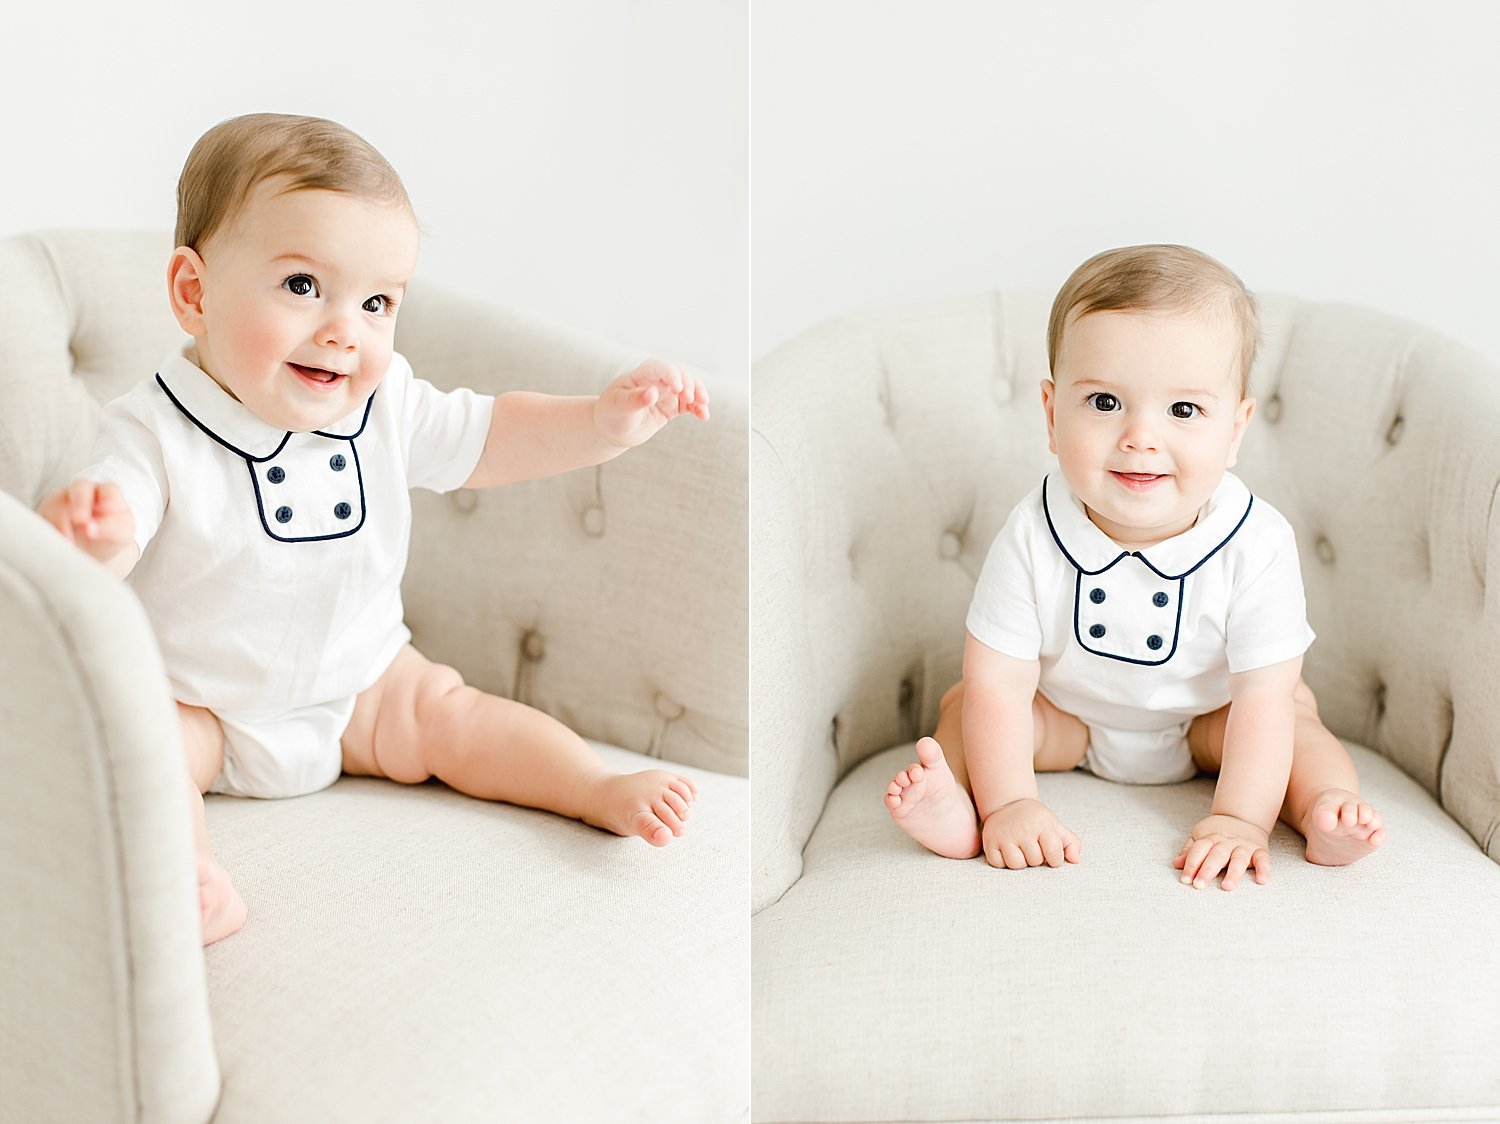 8 month old baby boy sitting up for milestone photos with Kristin Wood Photography.